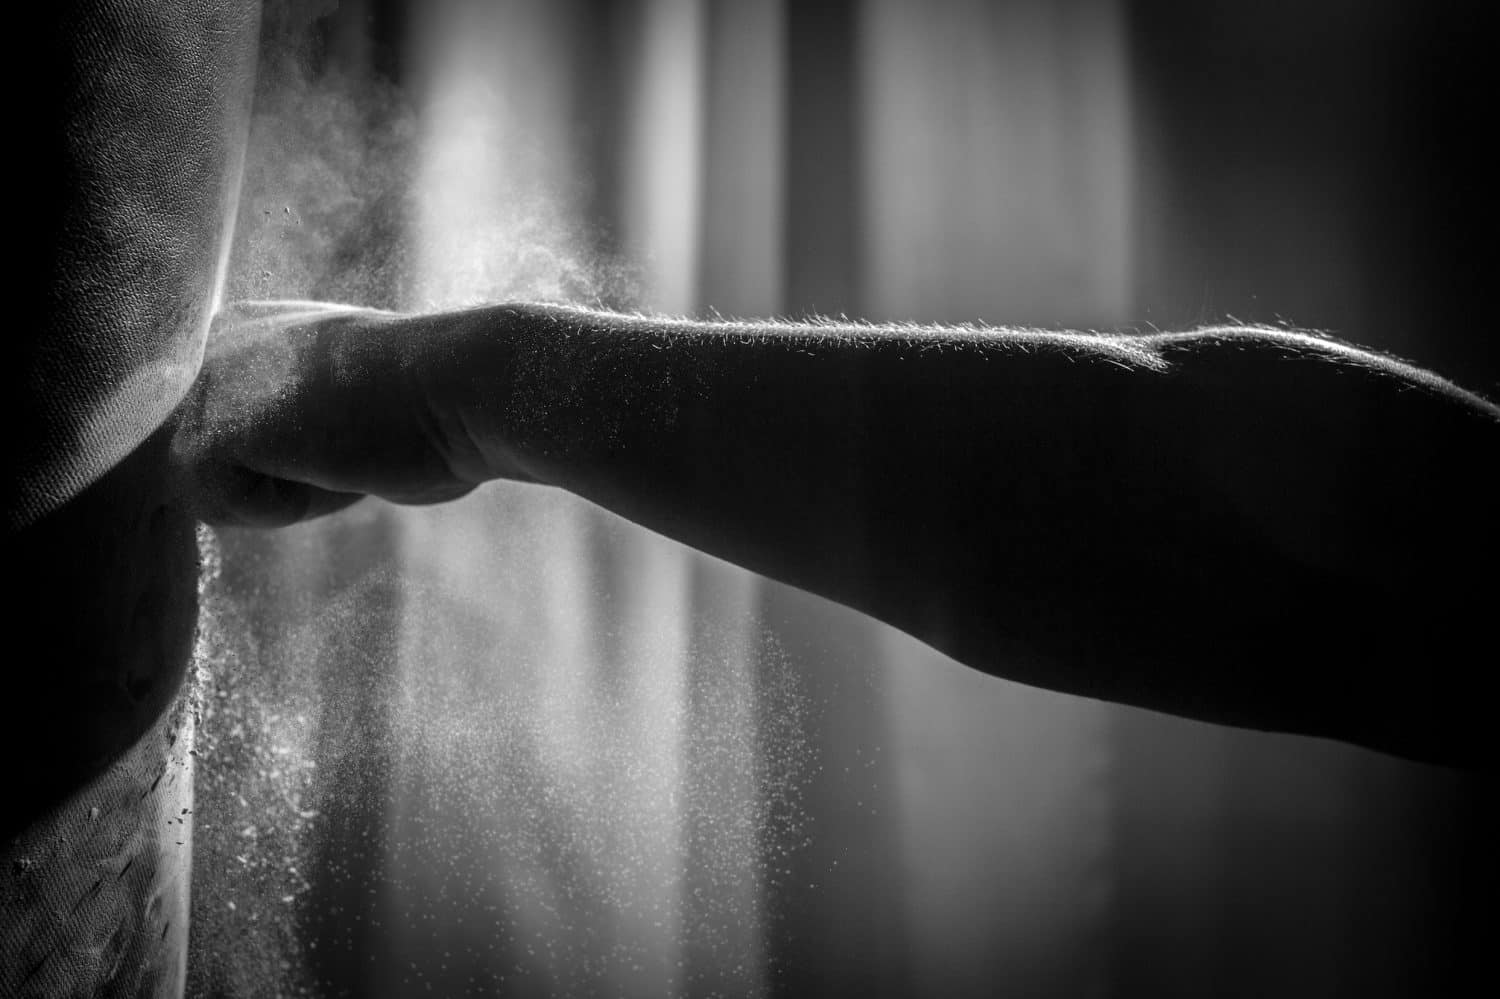 Shadowy, Black & White Close Up Action Photo of a Bare Knuckle Fist Hitting a Punching Bag with an Explosion of Dust